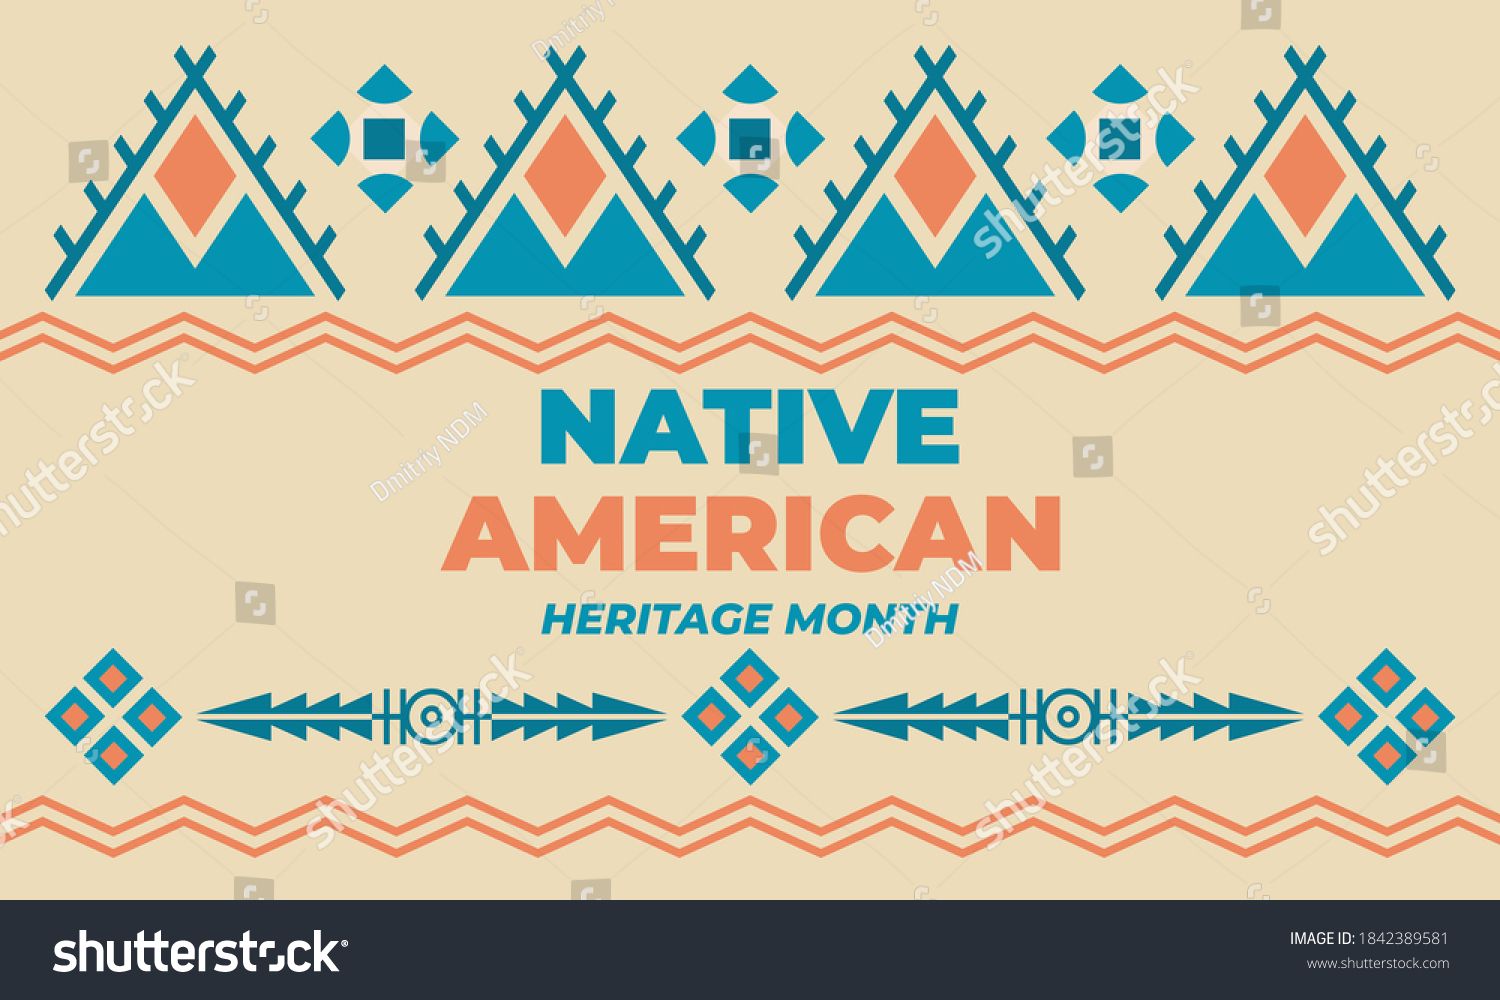 native-american-heritage-month-annual-designation-stock-vector-royalty